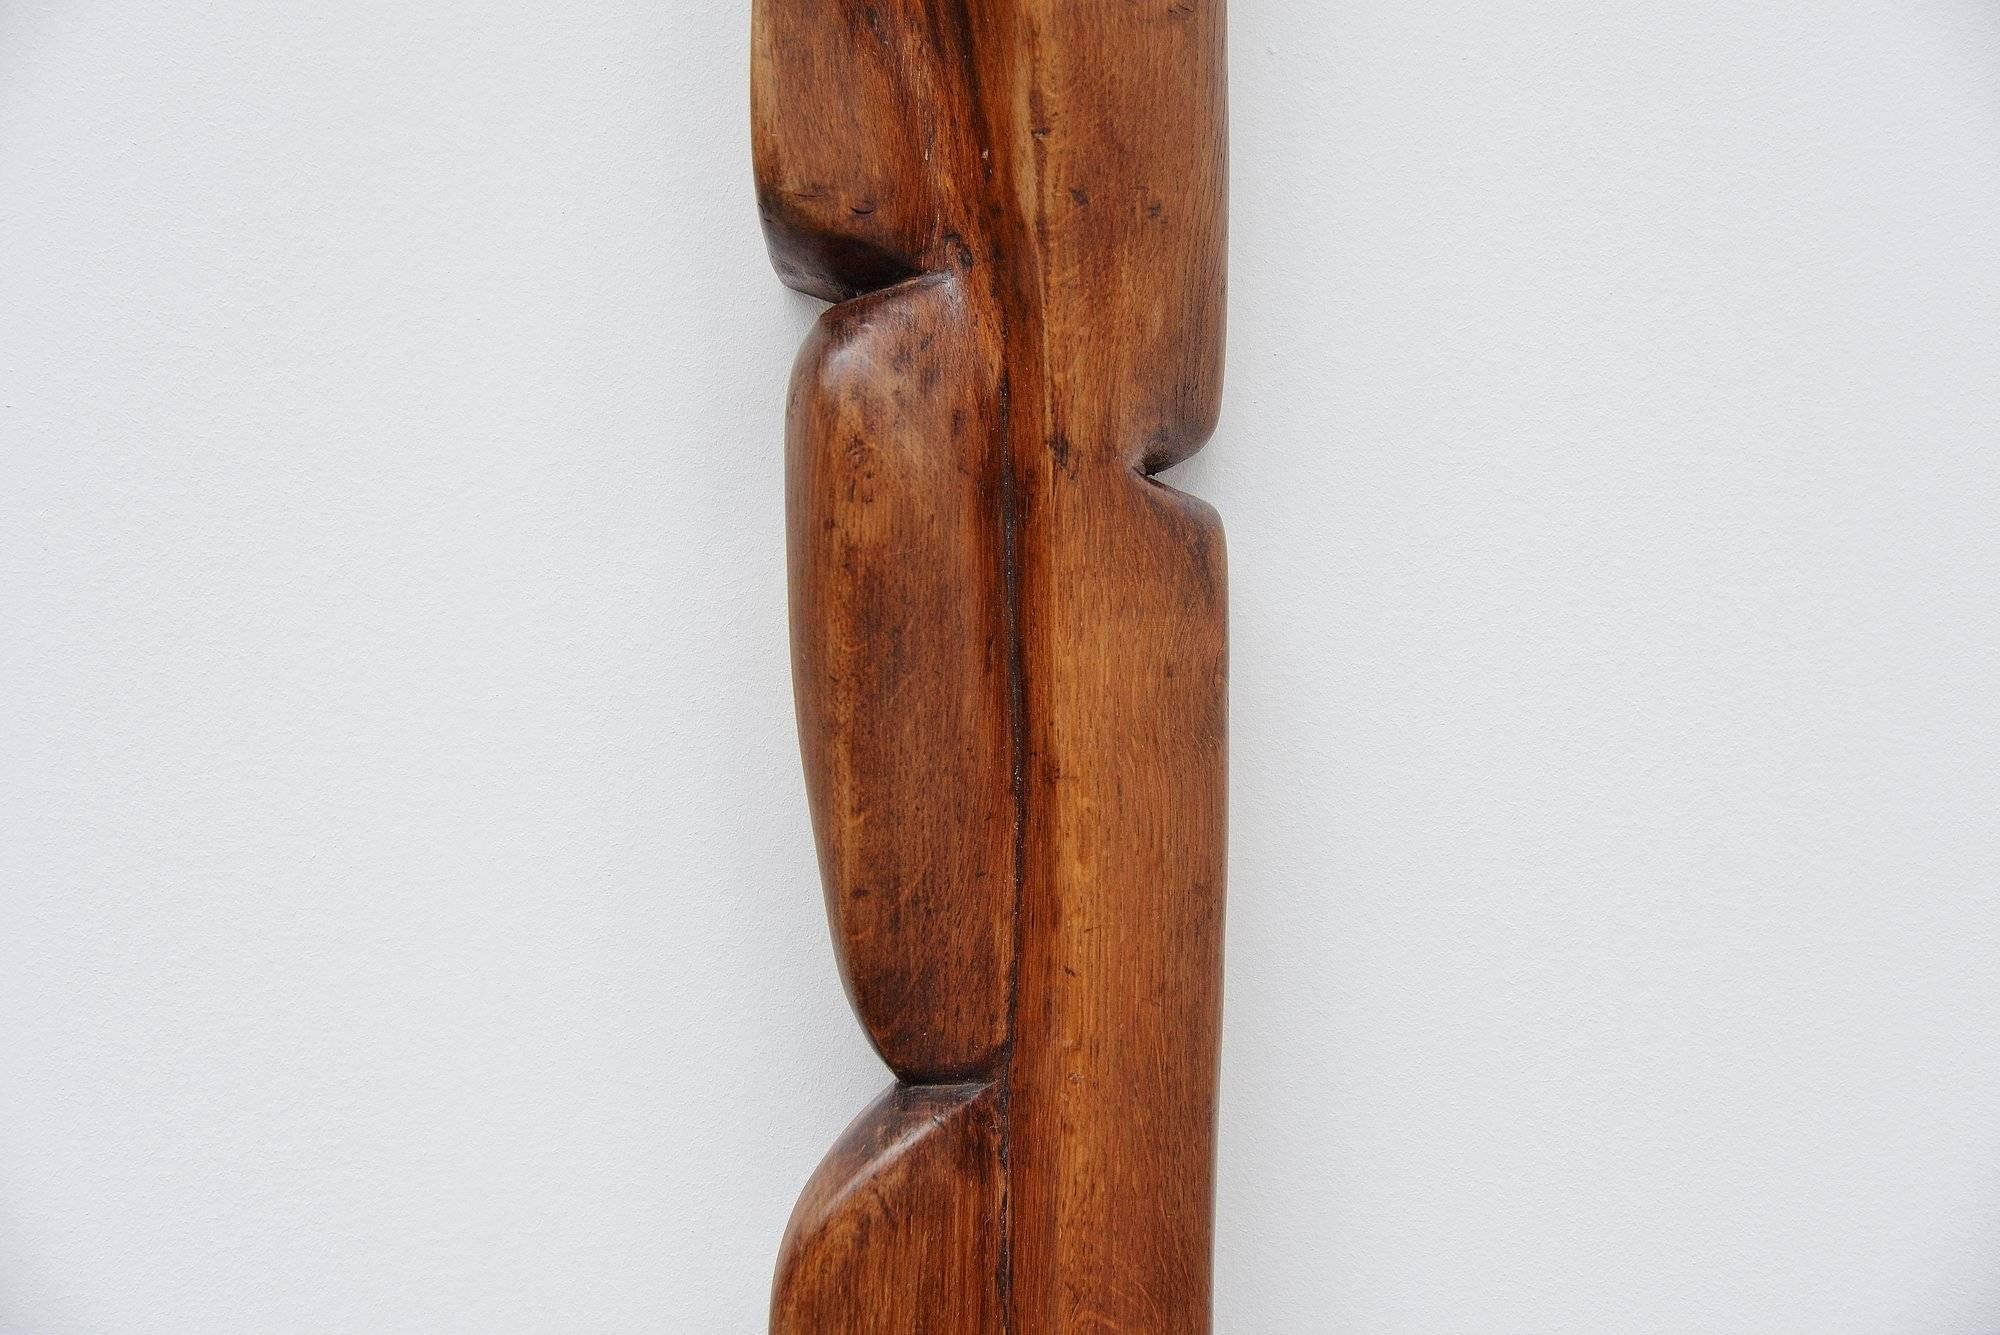 Beautiful wall mounted abstract modern sculpture, made in Belgium by unknown artist. This piece is signed MH 7-1983. This was purchased in Belgium so it must be a Belgian artist I am sure. The piece is made of handcrafted dark stained oak and has